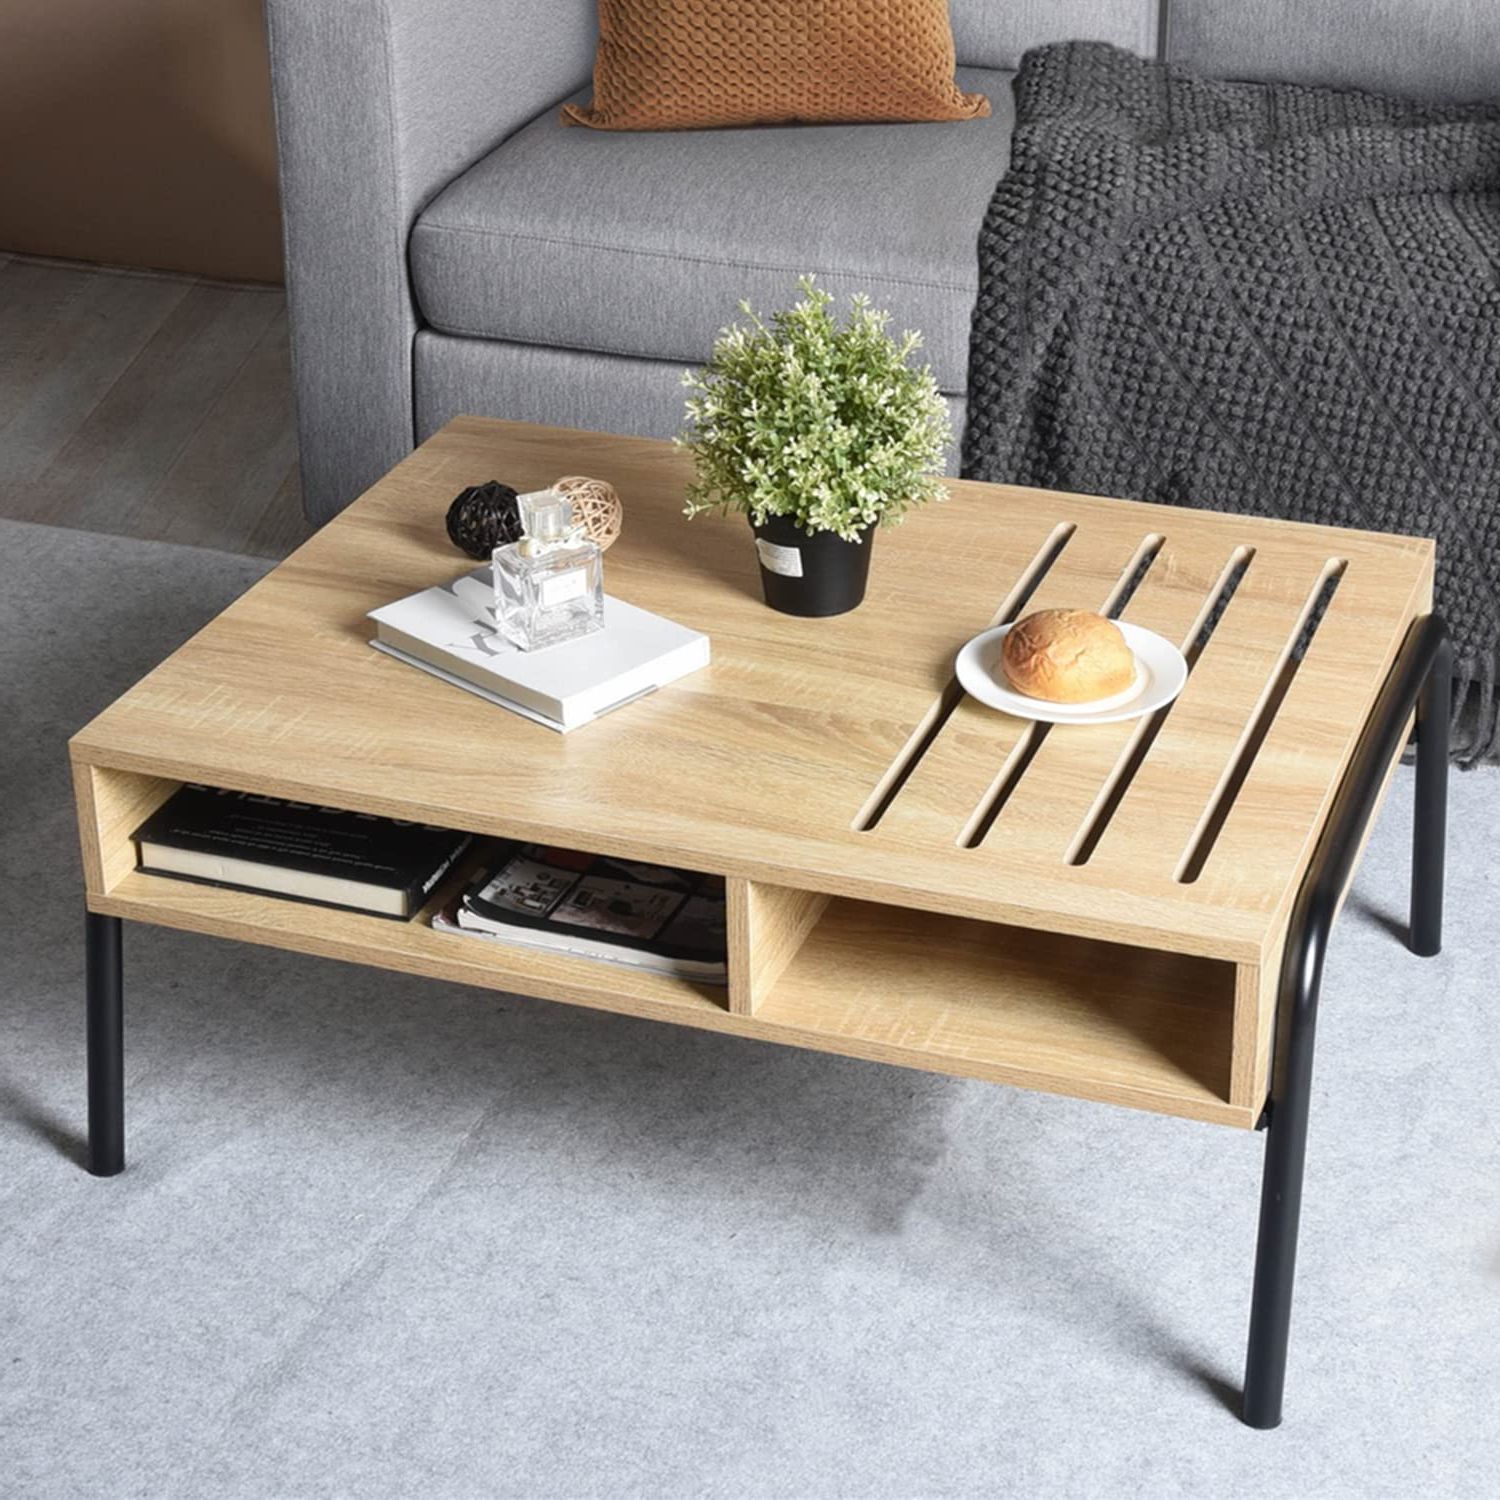 Amazon: Furniturer Modern Coffee Table With Open Storage Shelf,  Rectangle Tabletop Wood Tea Cocktail Living Room Center Table, Oak : Home &  Kitchen For Most Popular Coffee Tables With Open Storage Shelves (View 4 of 10)